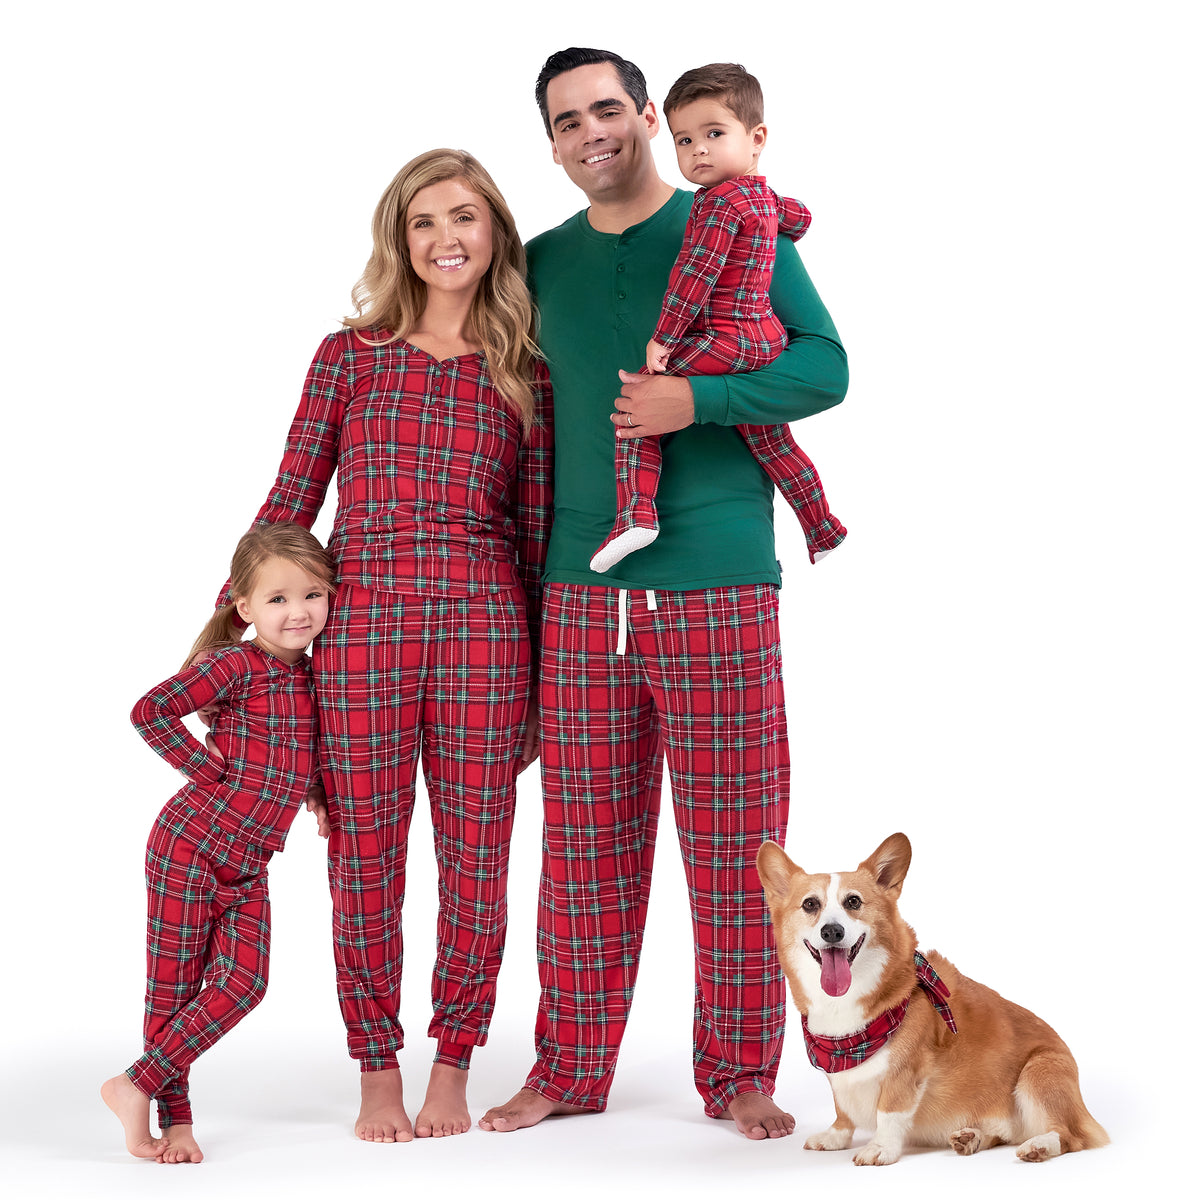 A heartwarming image capturing a family and their dog, all clad in red and green plaid pajamas, enjoying the holiday season in their Christmas-themed sleepwear.